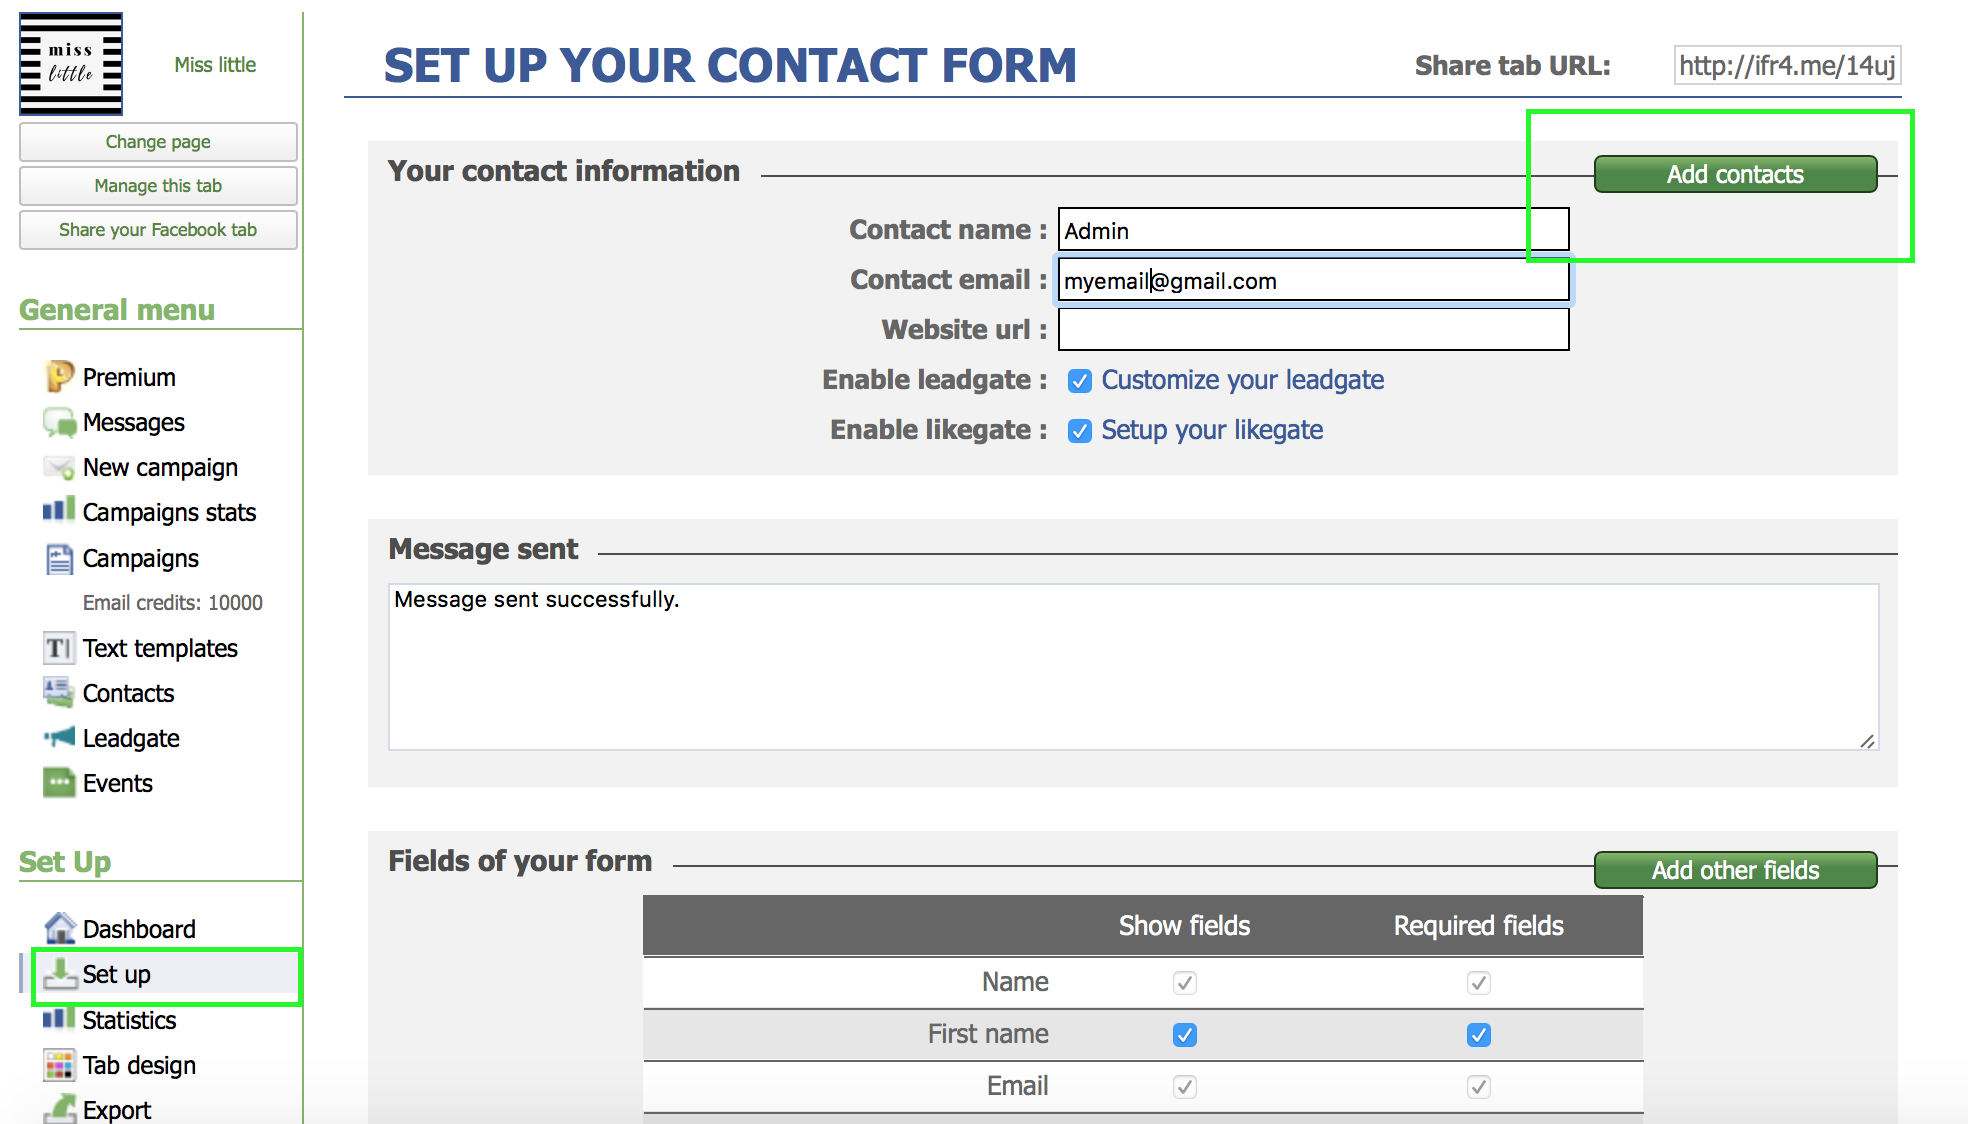 Add a new contact in contact form